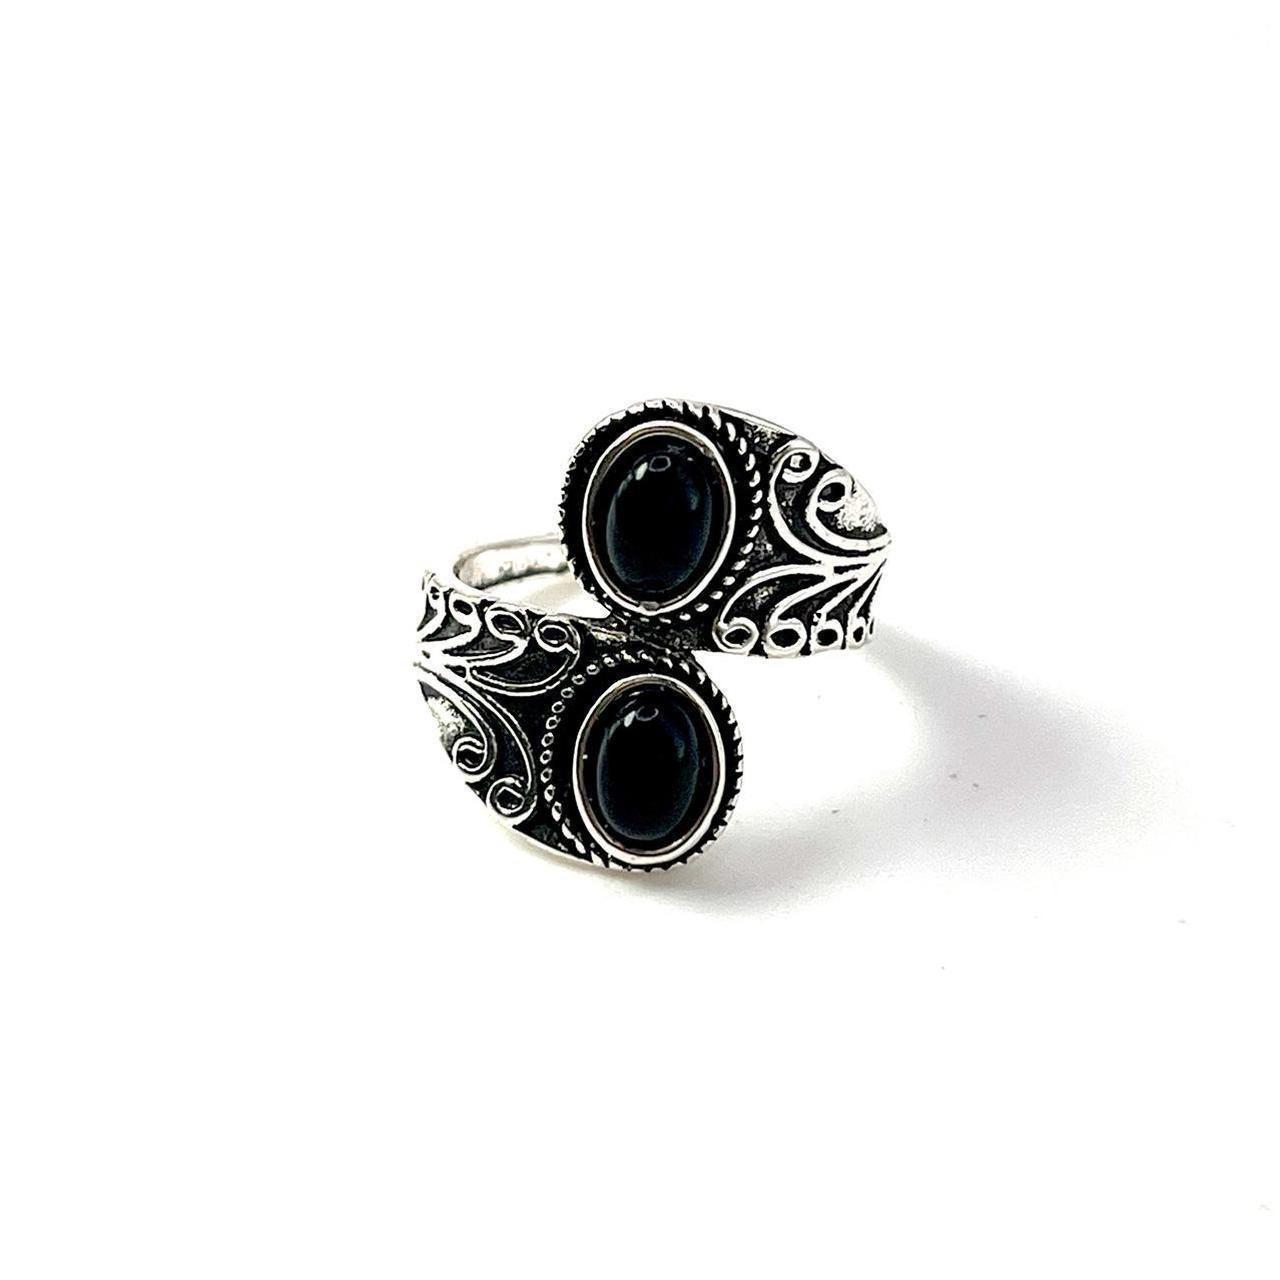 Established Jewelry Women's Silver and Black Jewellery (2)